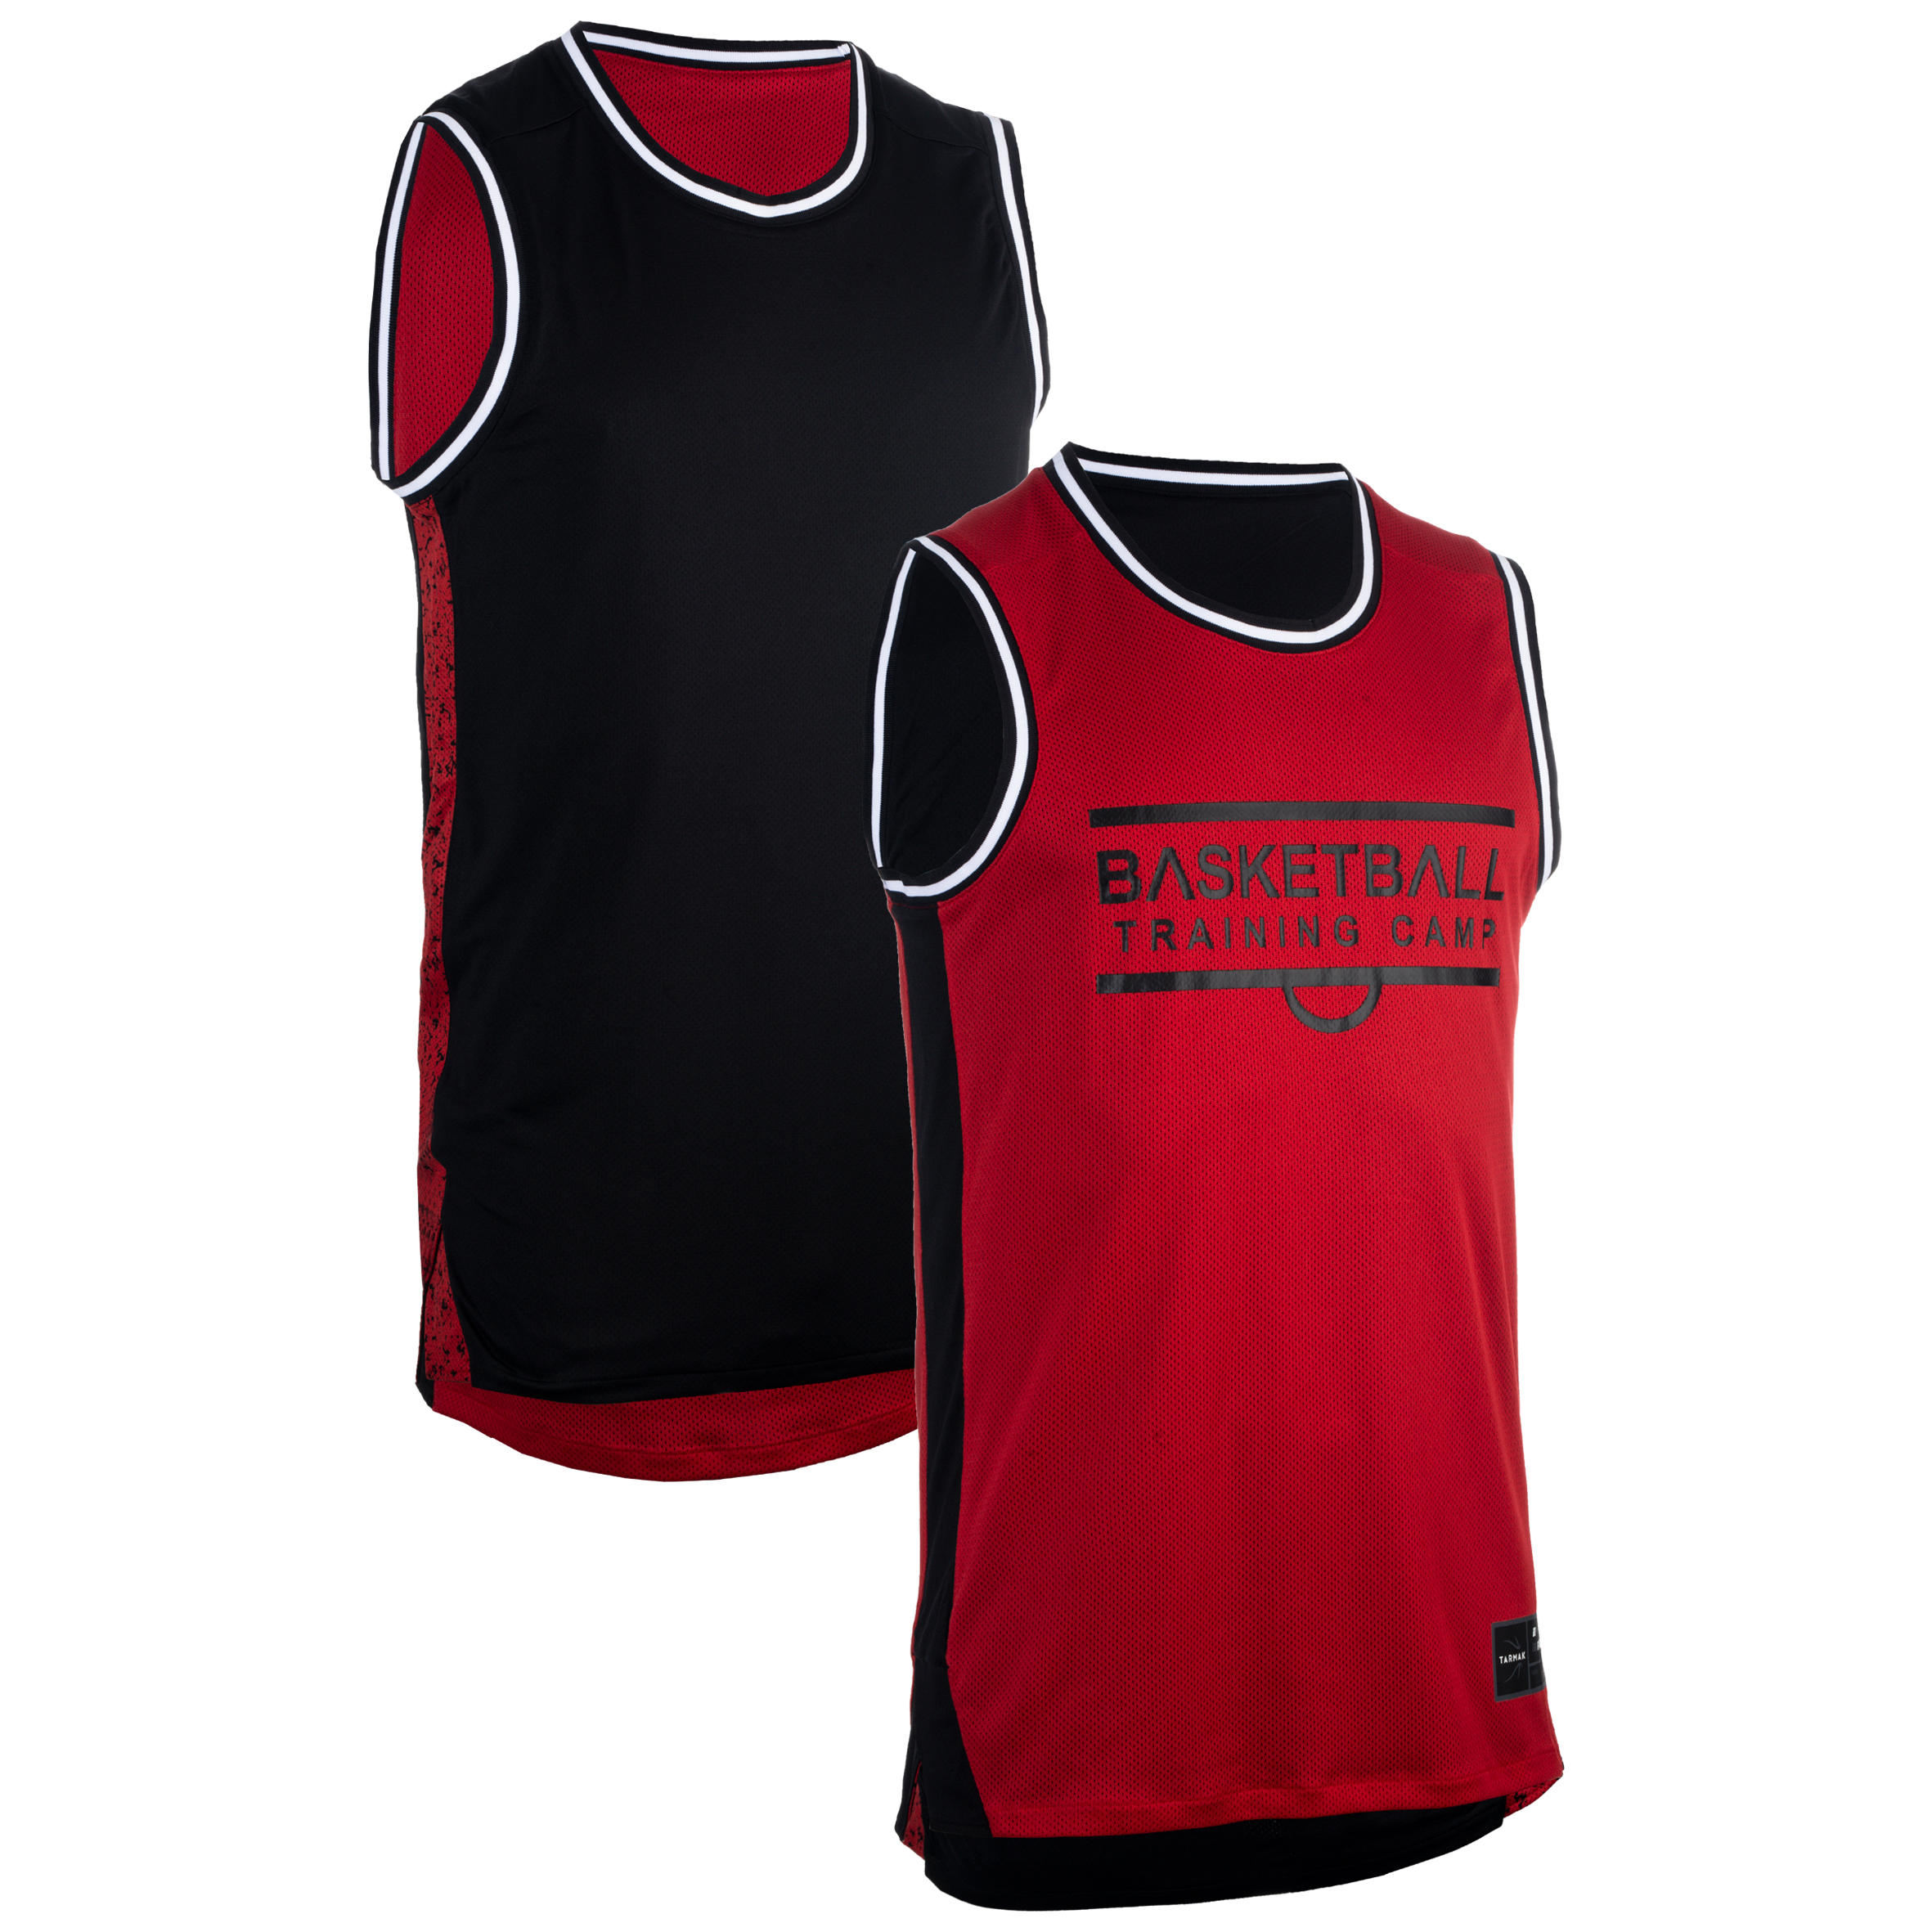 jersey basketball red